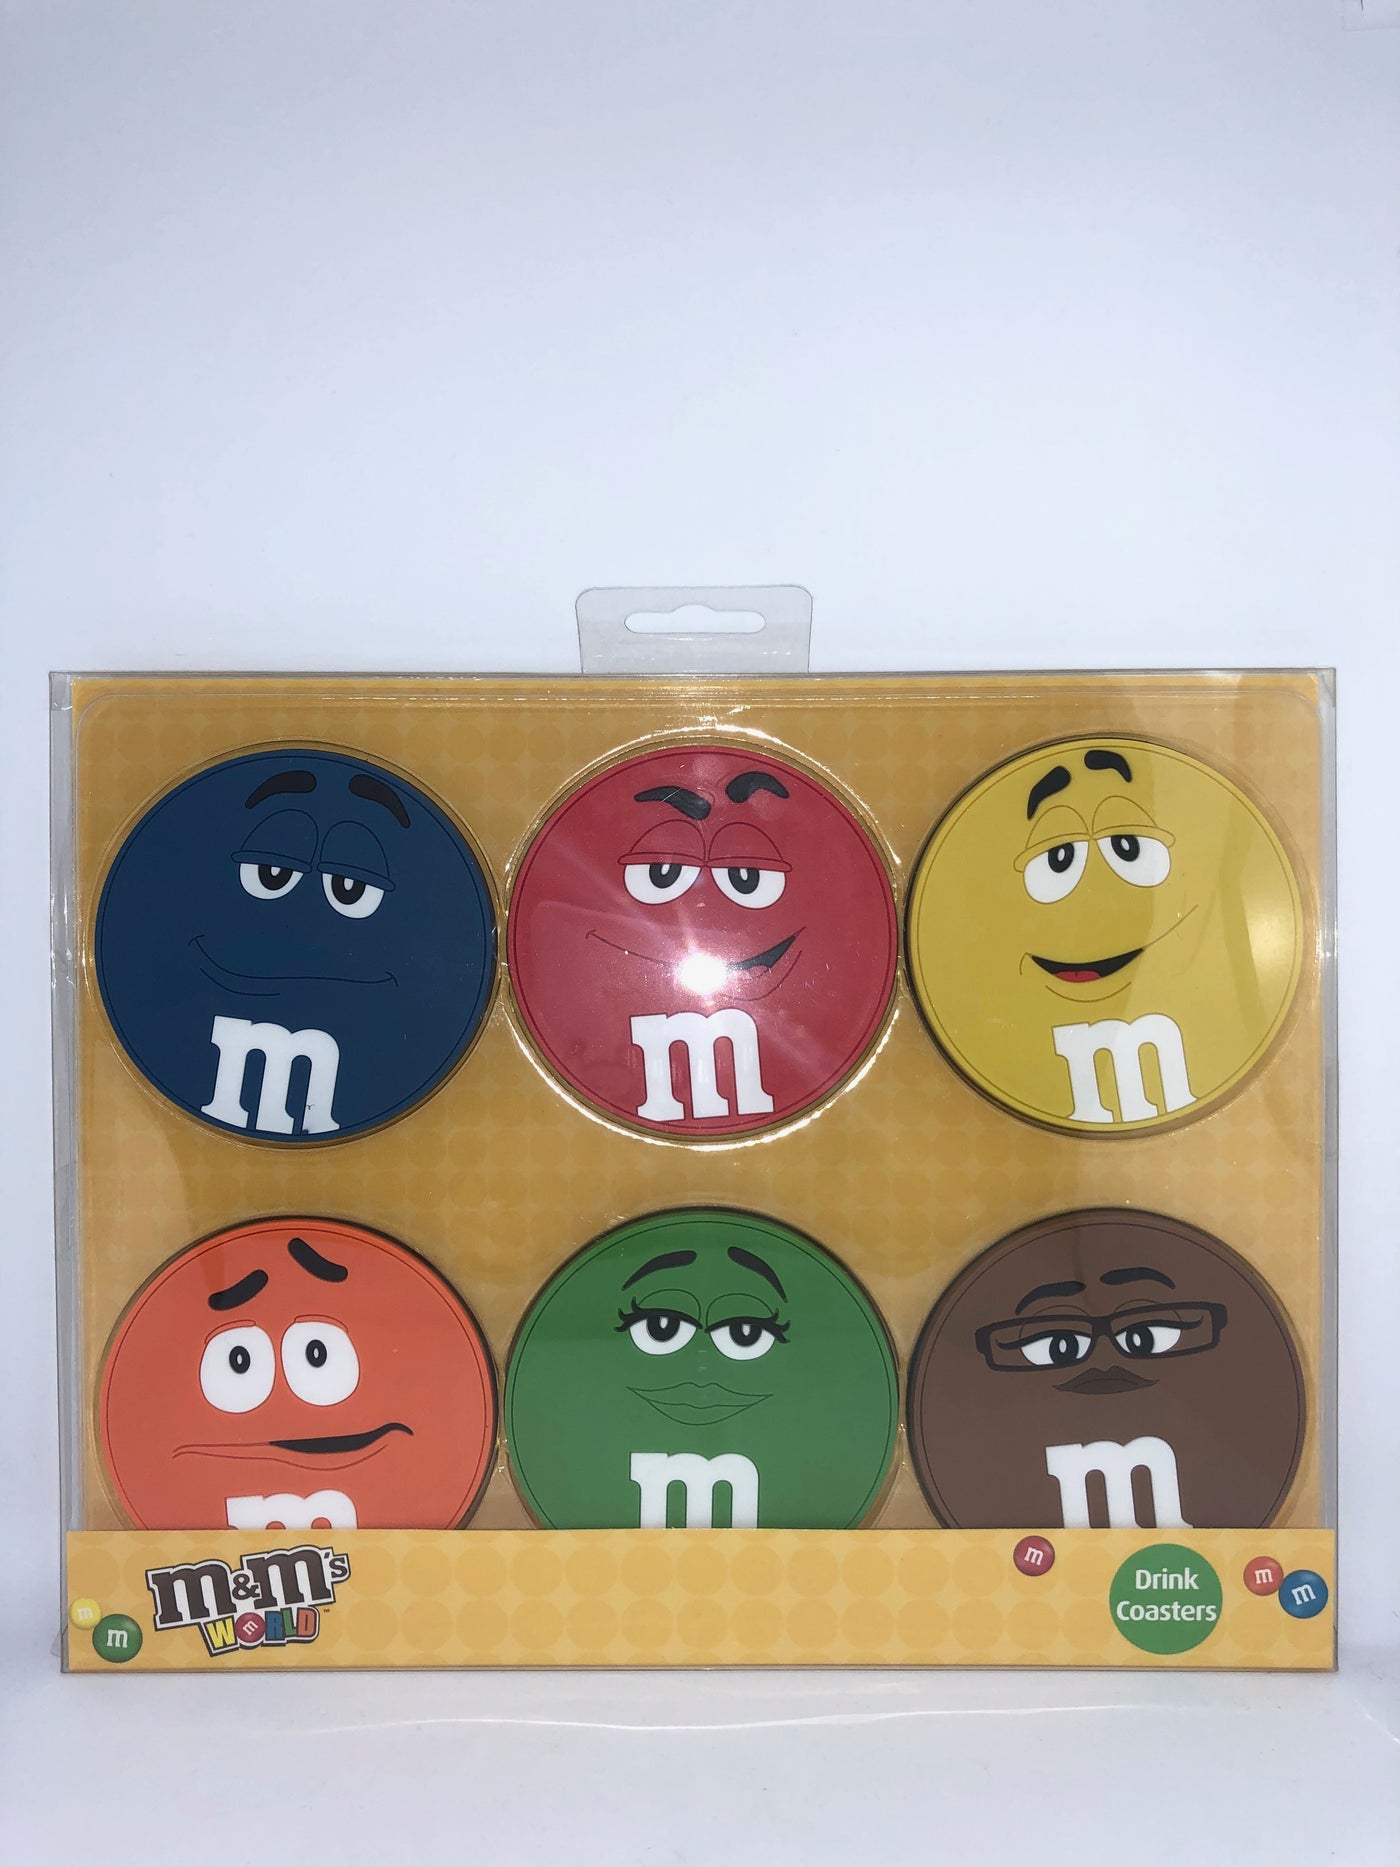 M&M's World Characters Coaster New With Box